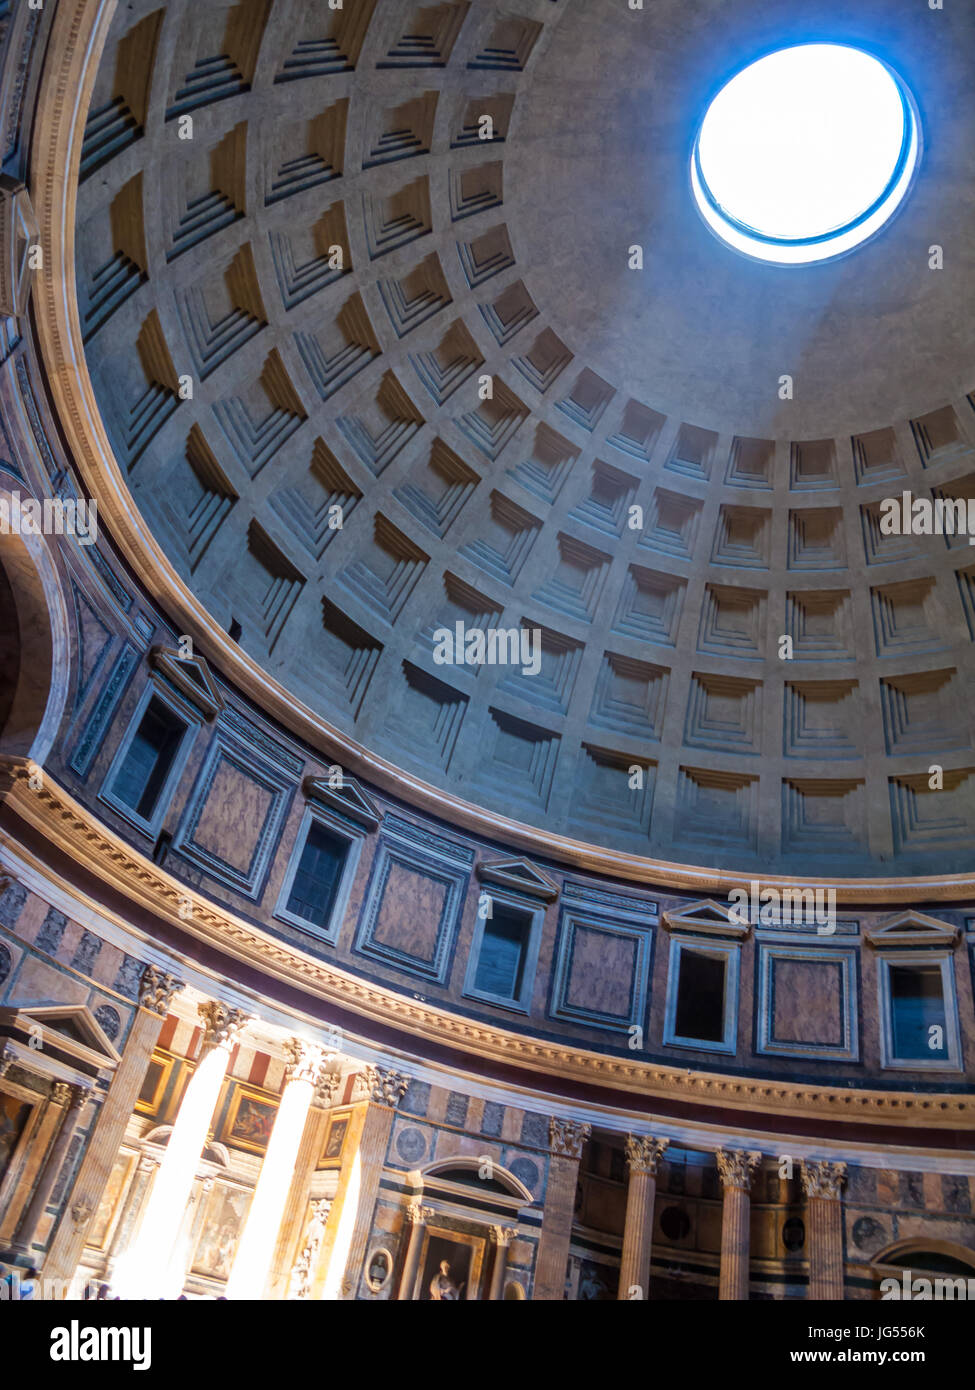 The Pantheon a temple of every god is a former Roman temple, now a church, in Rome, Italy with the Oculus or hole in the roof Stock Photo